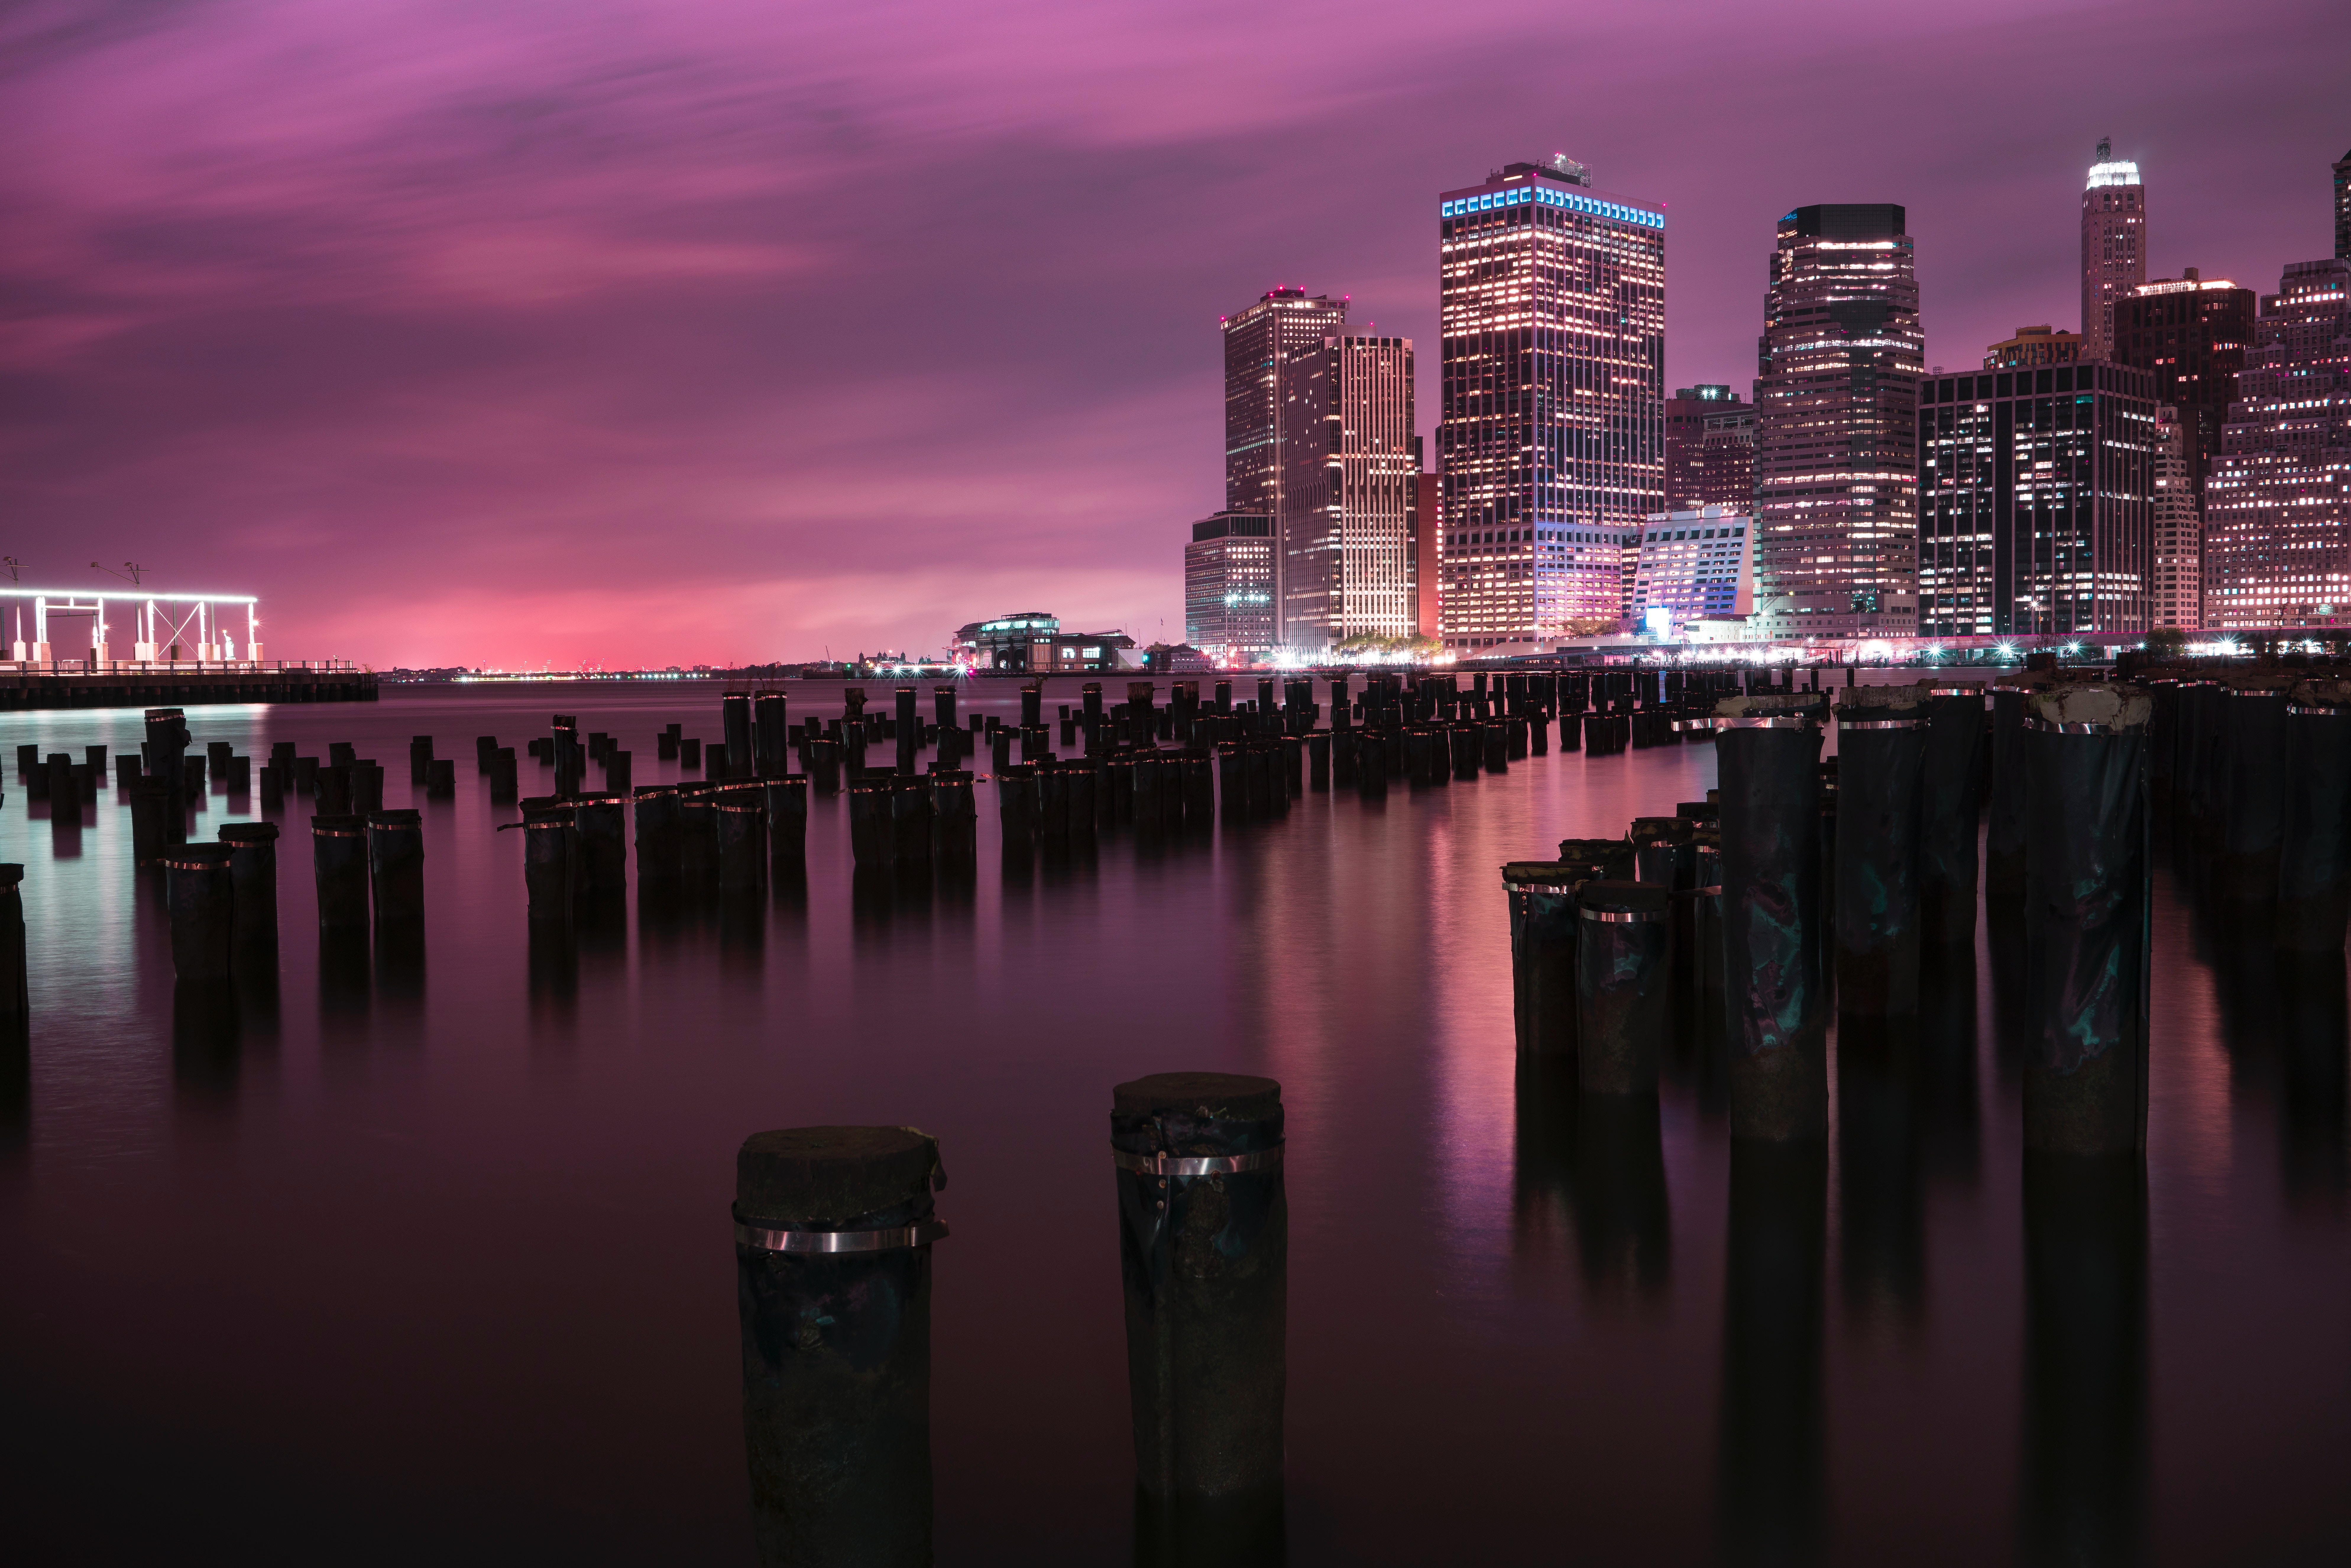 usa, night city, city lights, shore, bank, cities, building, united states High Definition image